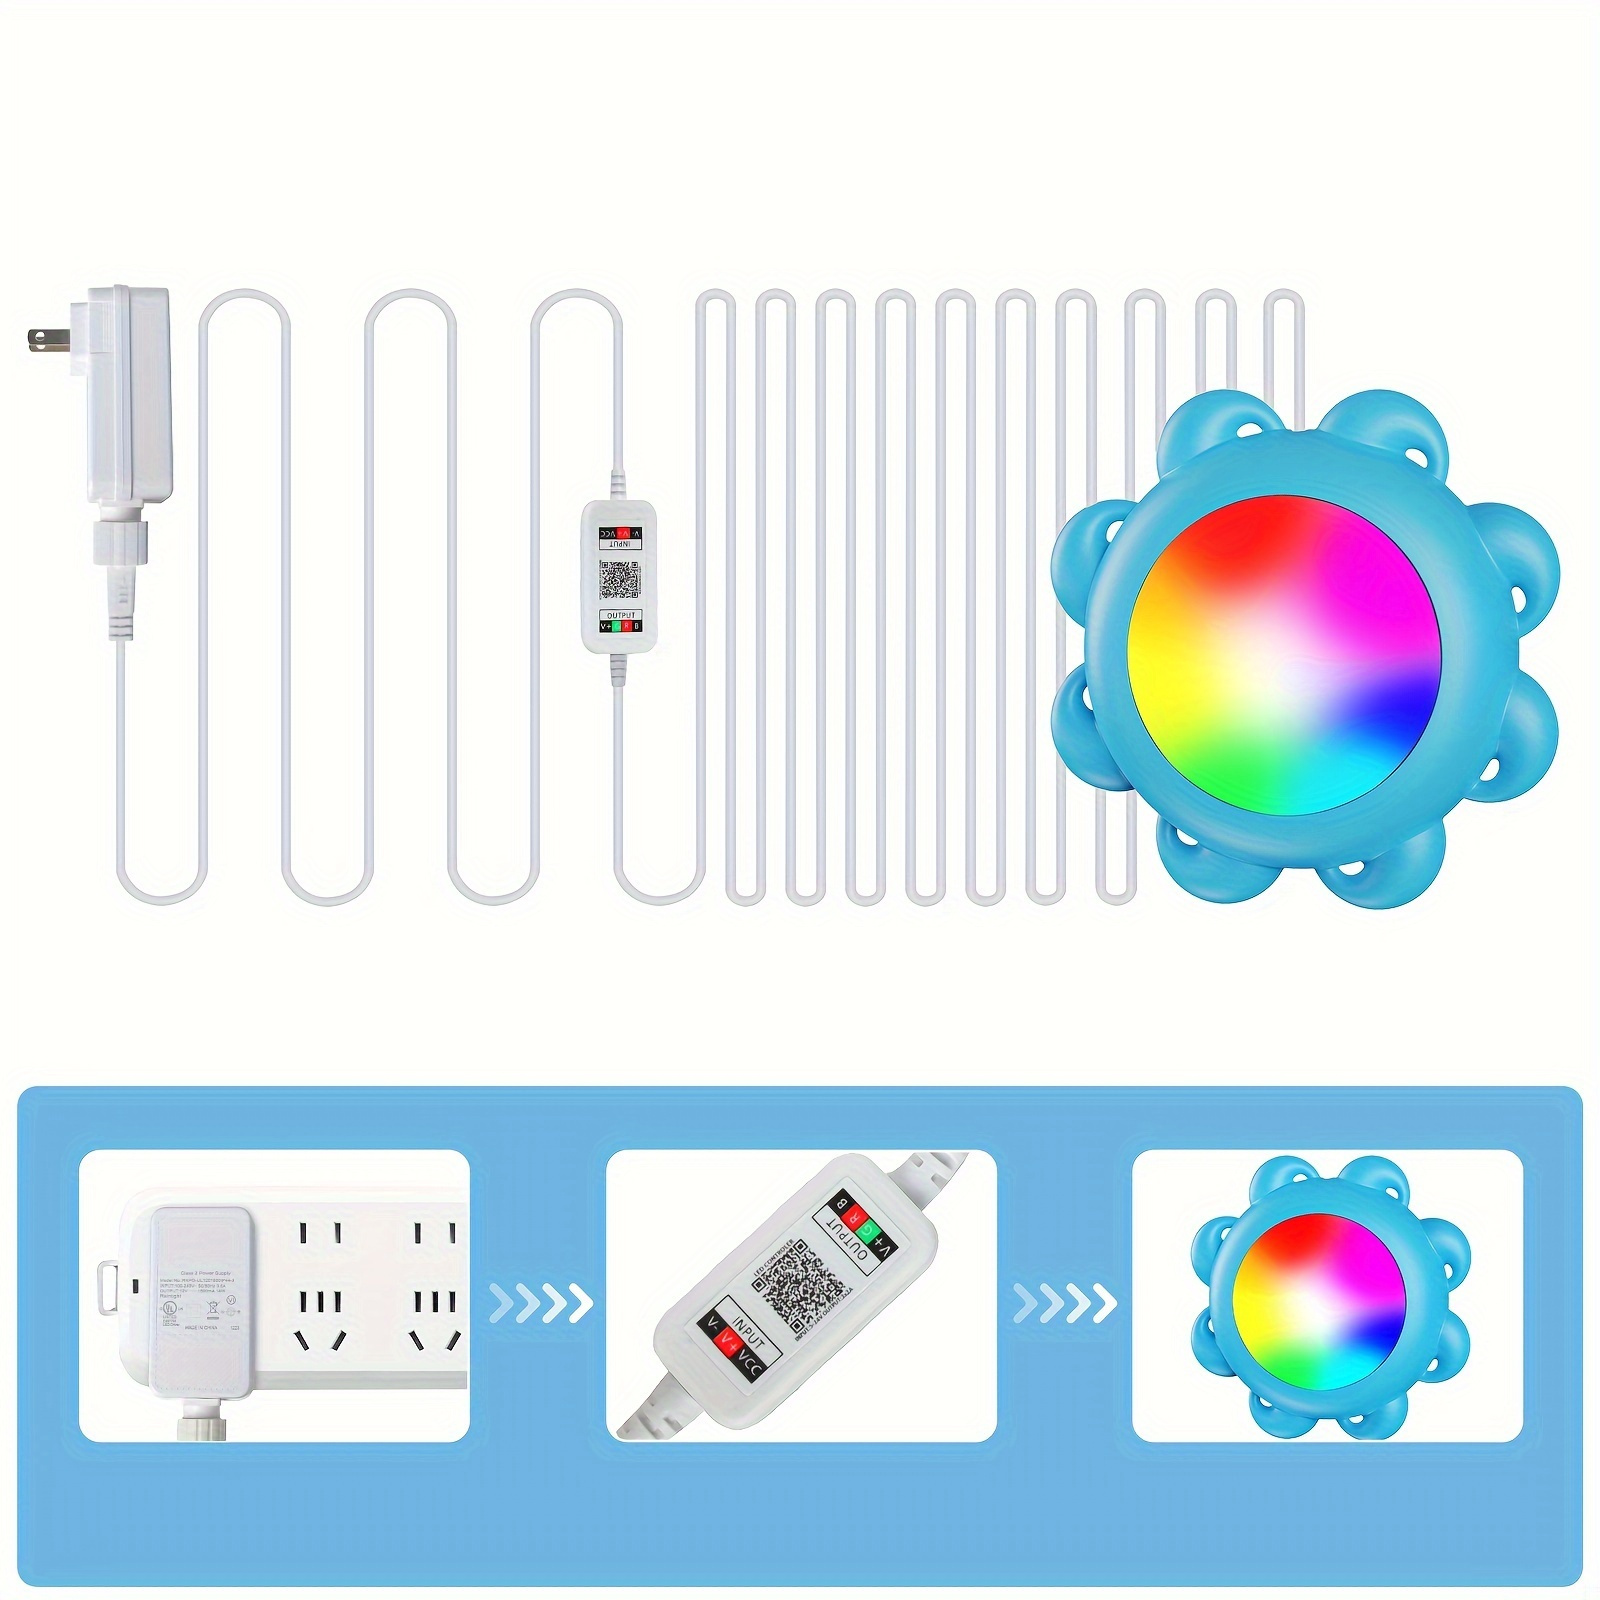 

Led Pool Light-pool Lights With App Control 22w Rgb Color Changing Pool Light Music Sync 32ft Cord, Multi-color Display- Perfect For Pool Parties, Pond & Bath. 1pc & 2pc.